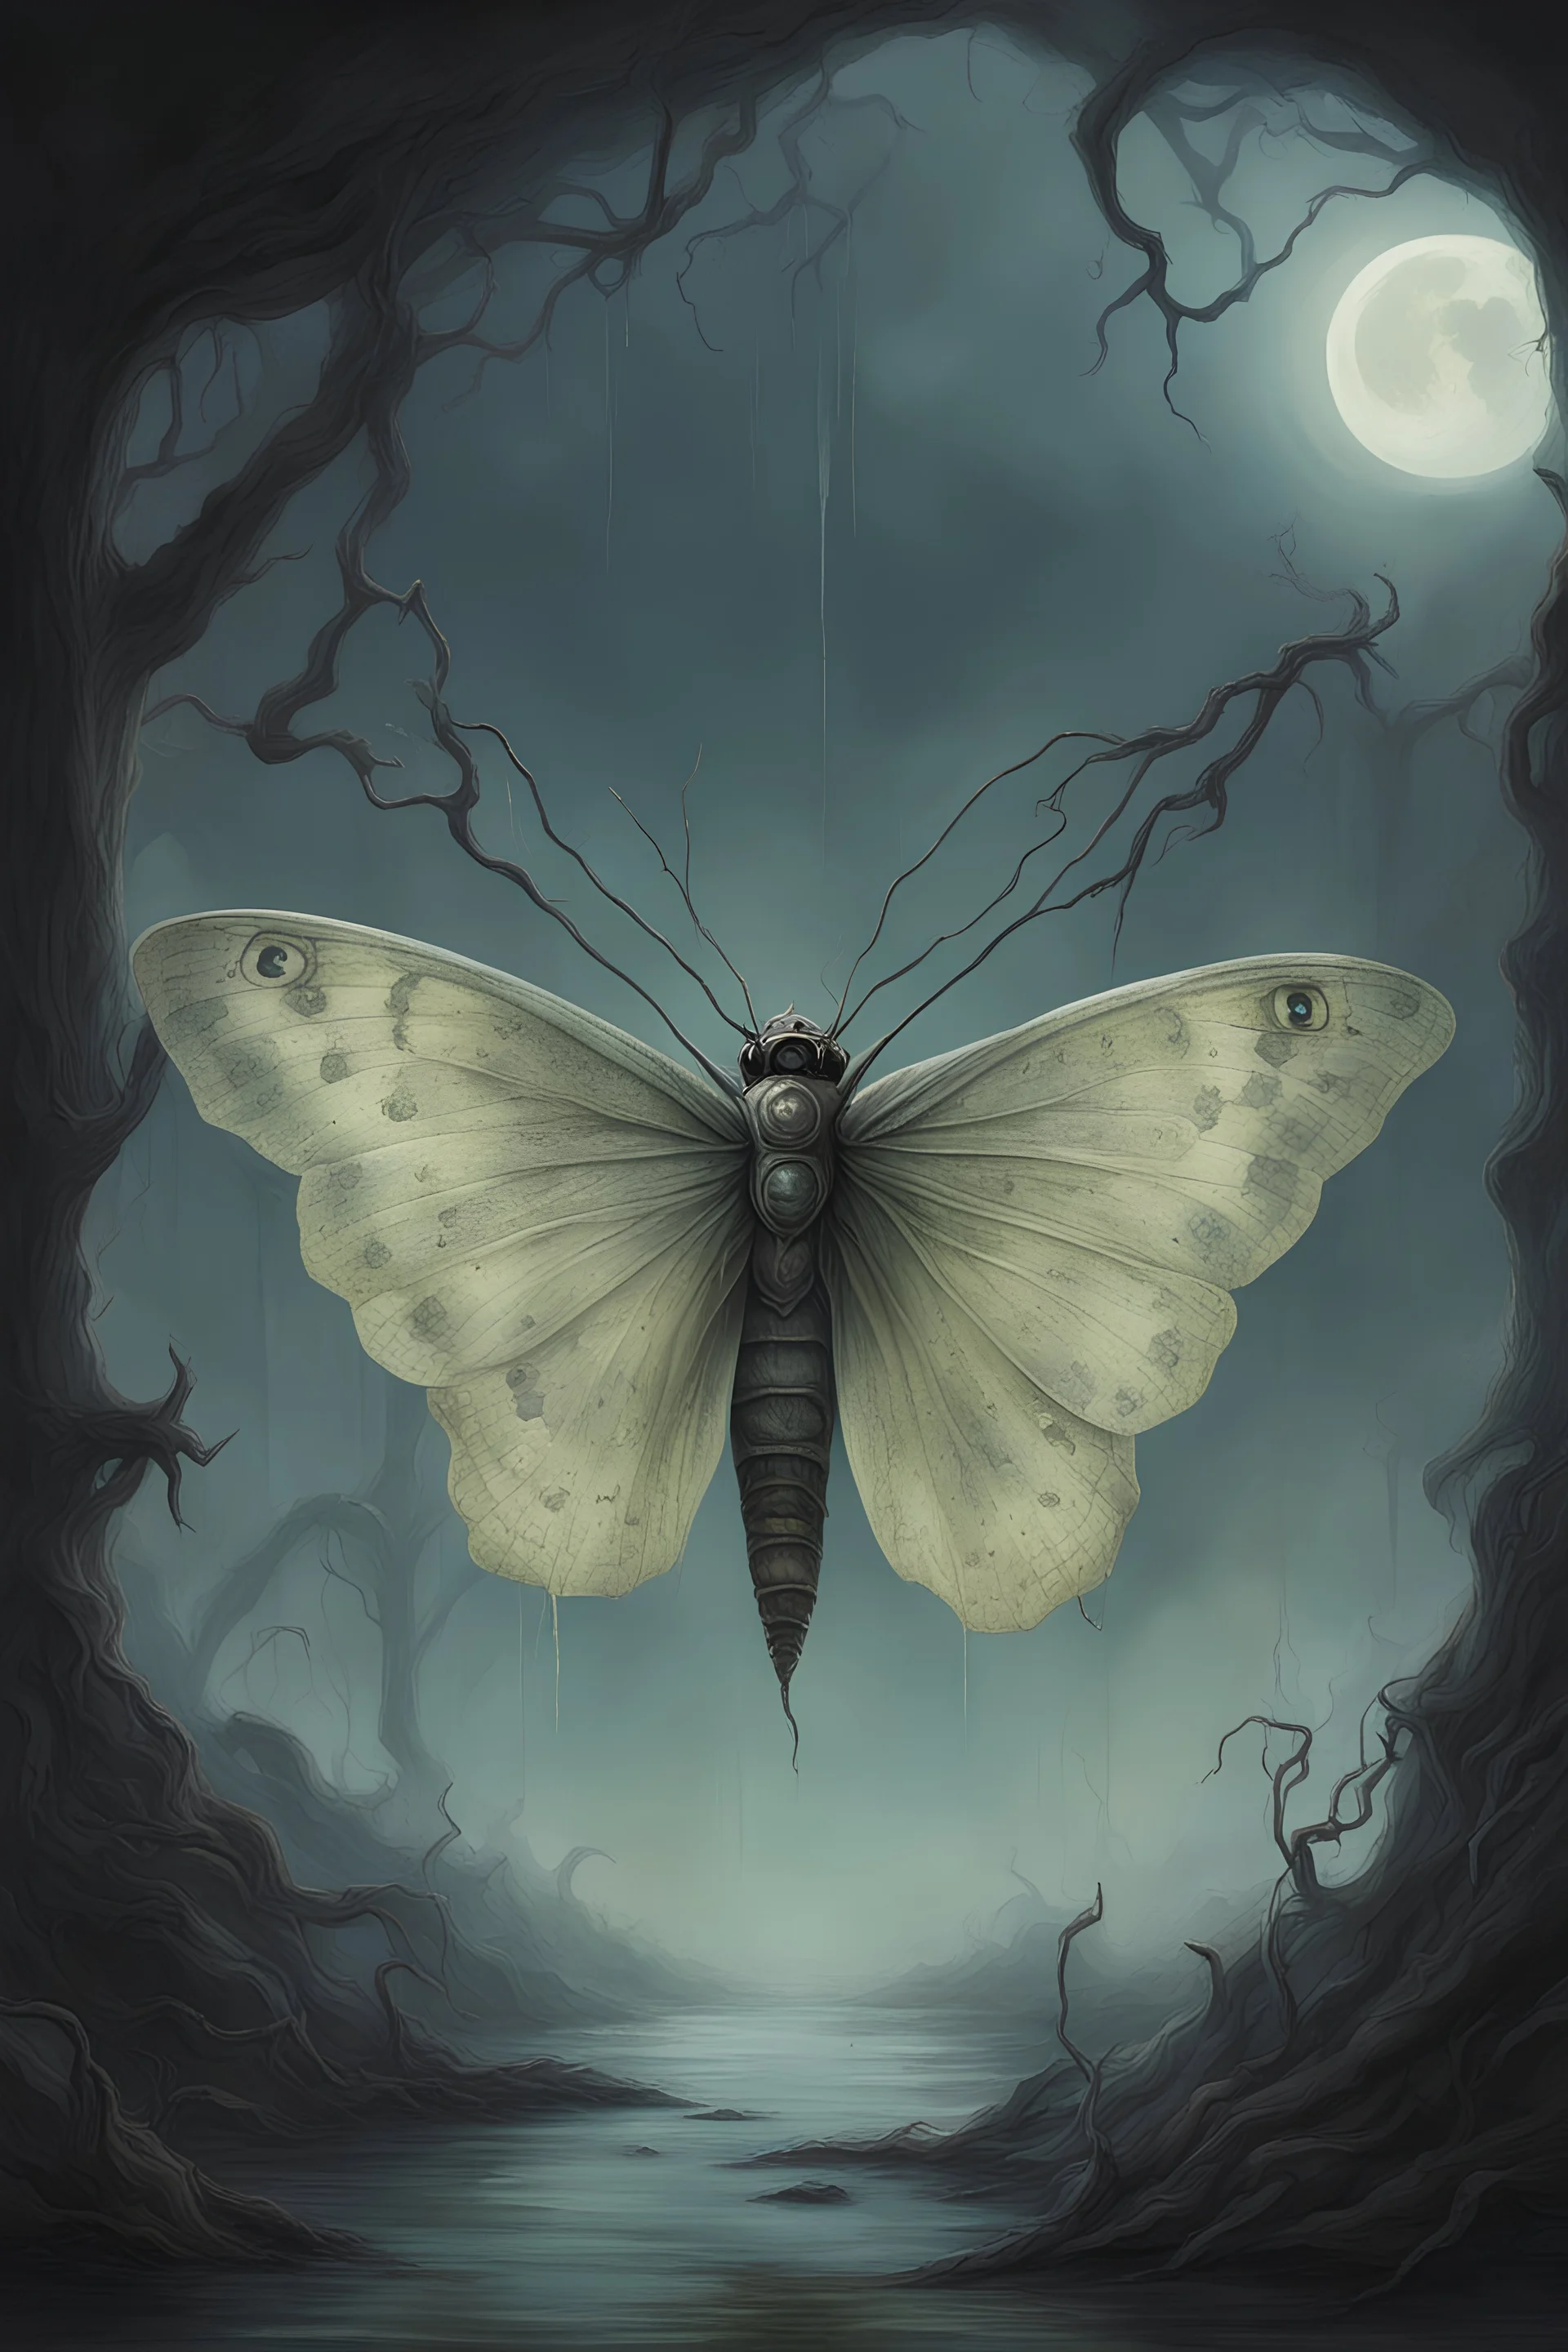 The track-mall gang went off On the Tennessee goth A lunar moth, you chrysalis and flail The water is rising, you try to rappel A rousing cheer for the boy in the well